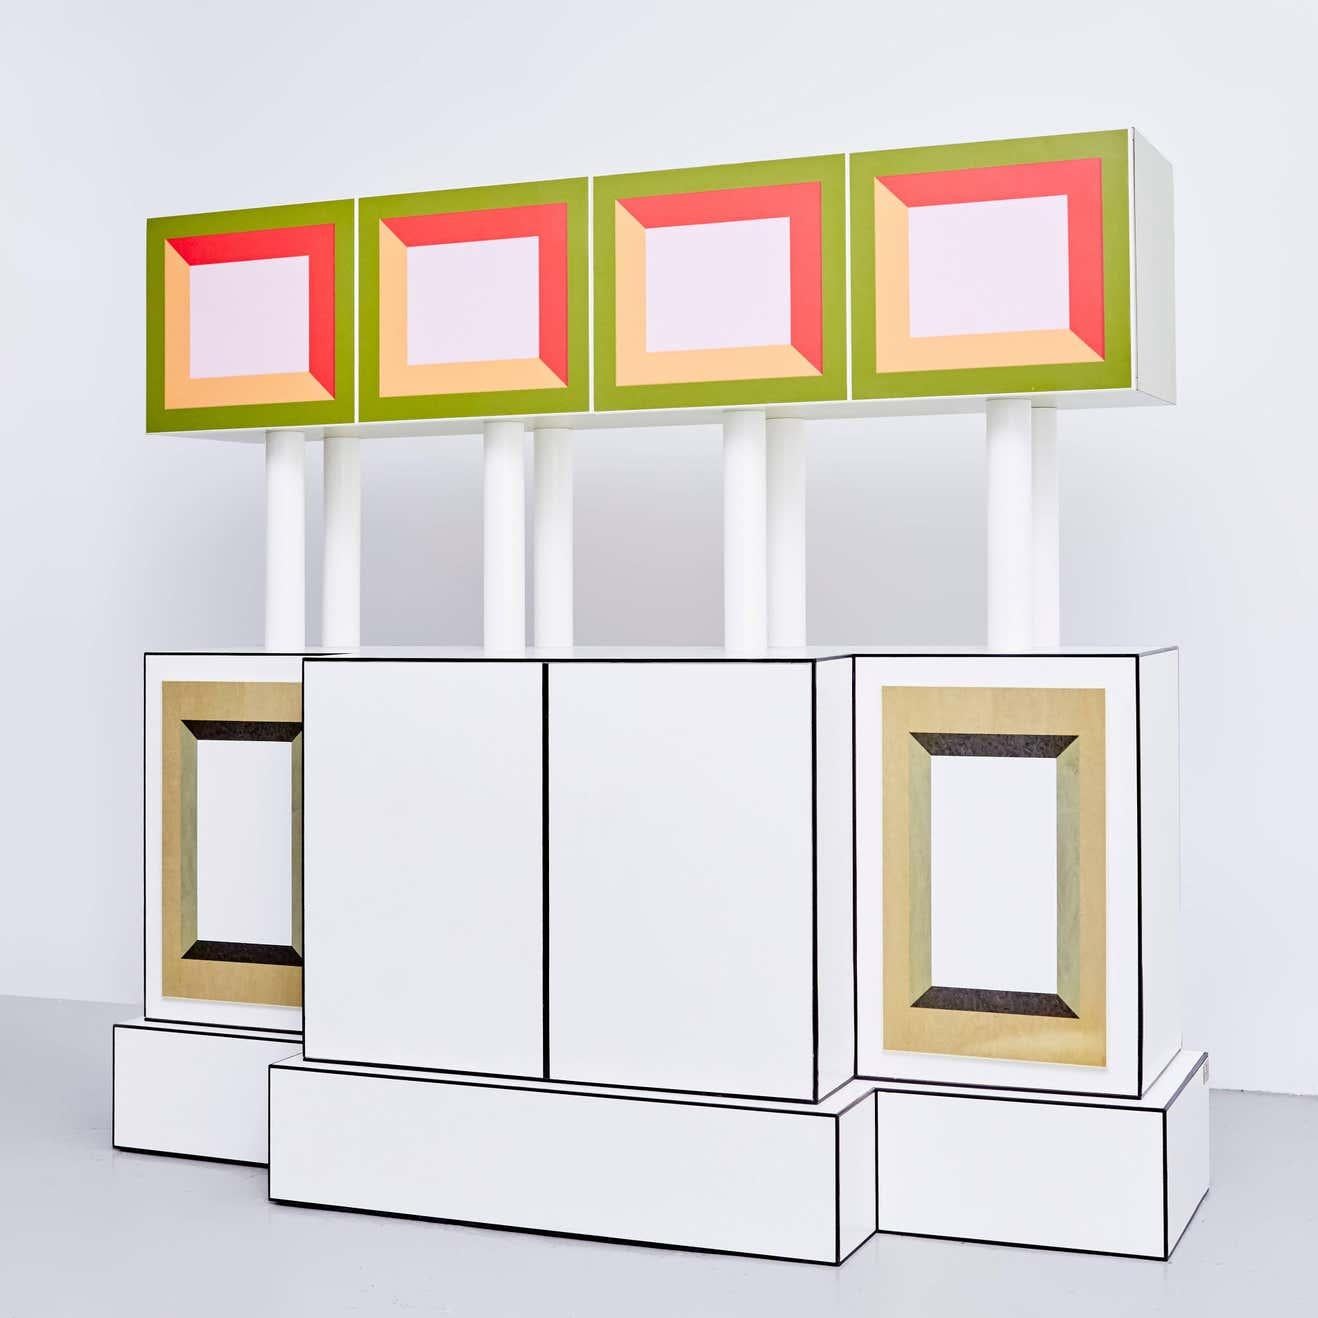 Piccoli Libri cabinet designed by Ettore Sottsass in 1992 edited by Design Gallery Milano.

P.A from a Limited edition of 9 + 3 P.A.

Plastic laminate-covered, maple-veneered wood, metal.

In original condition, with wear consistent with age